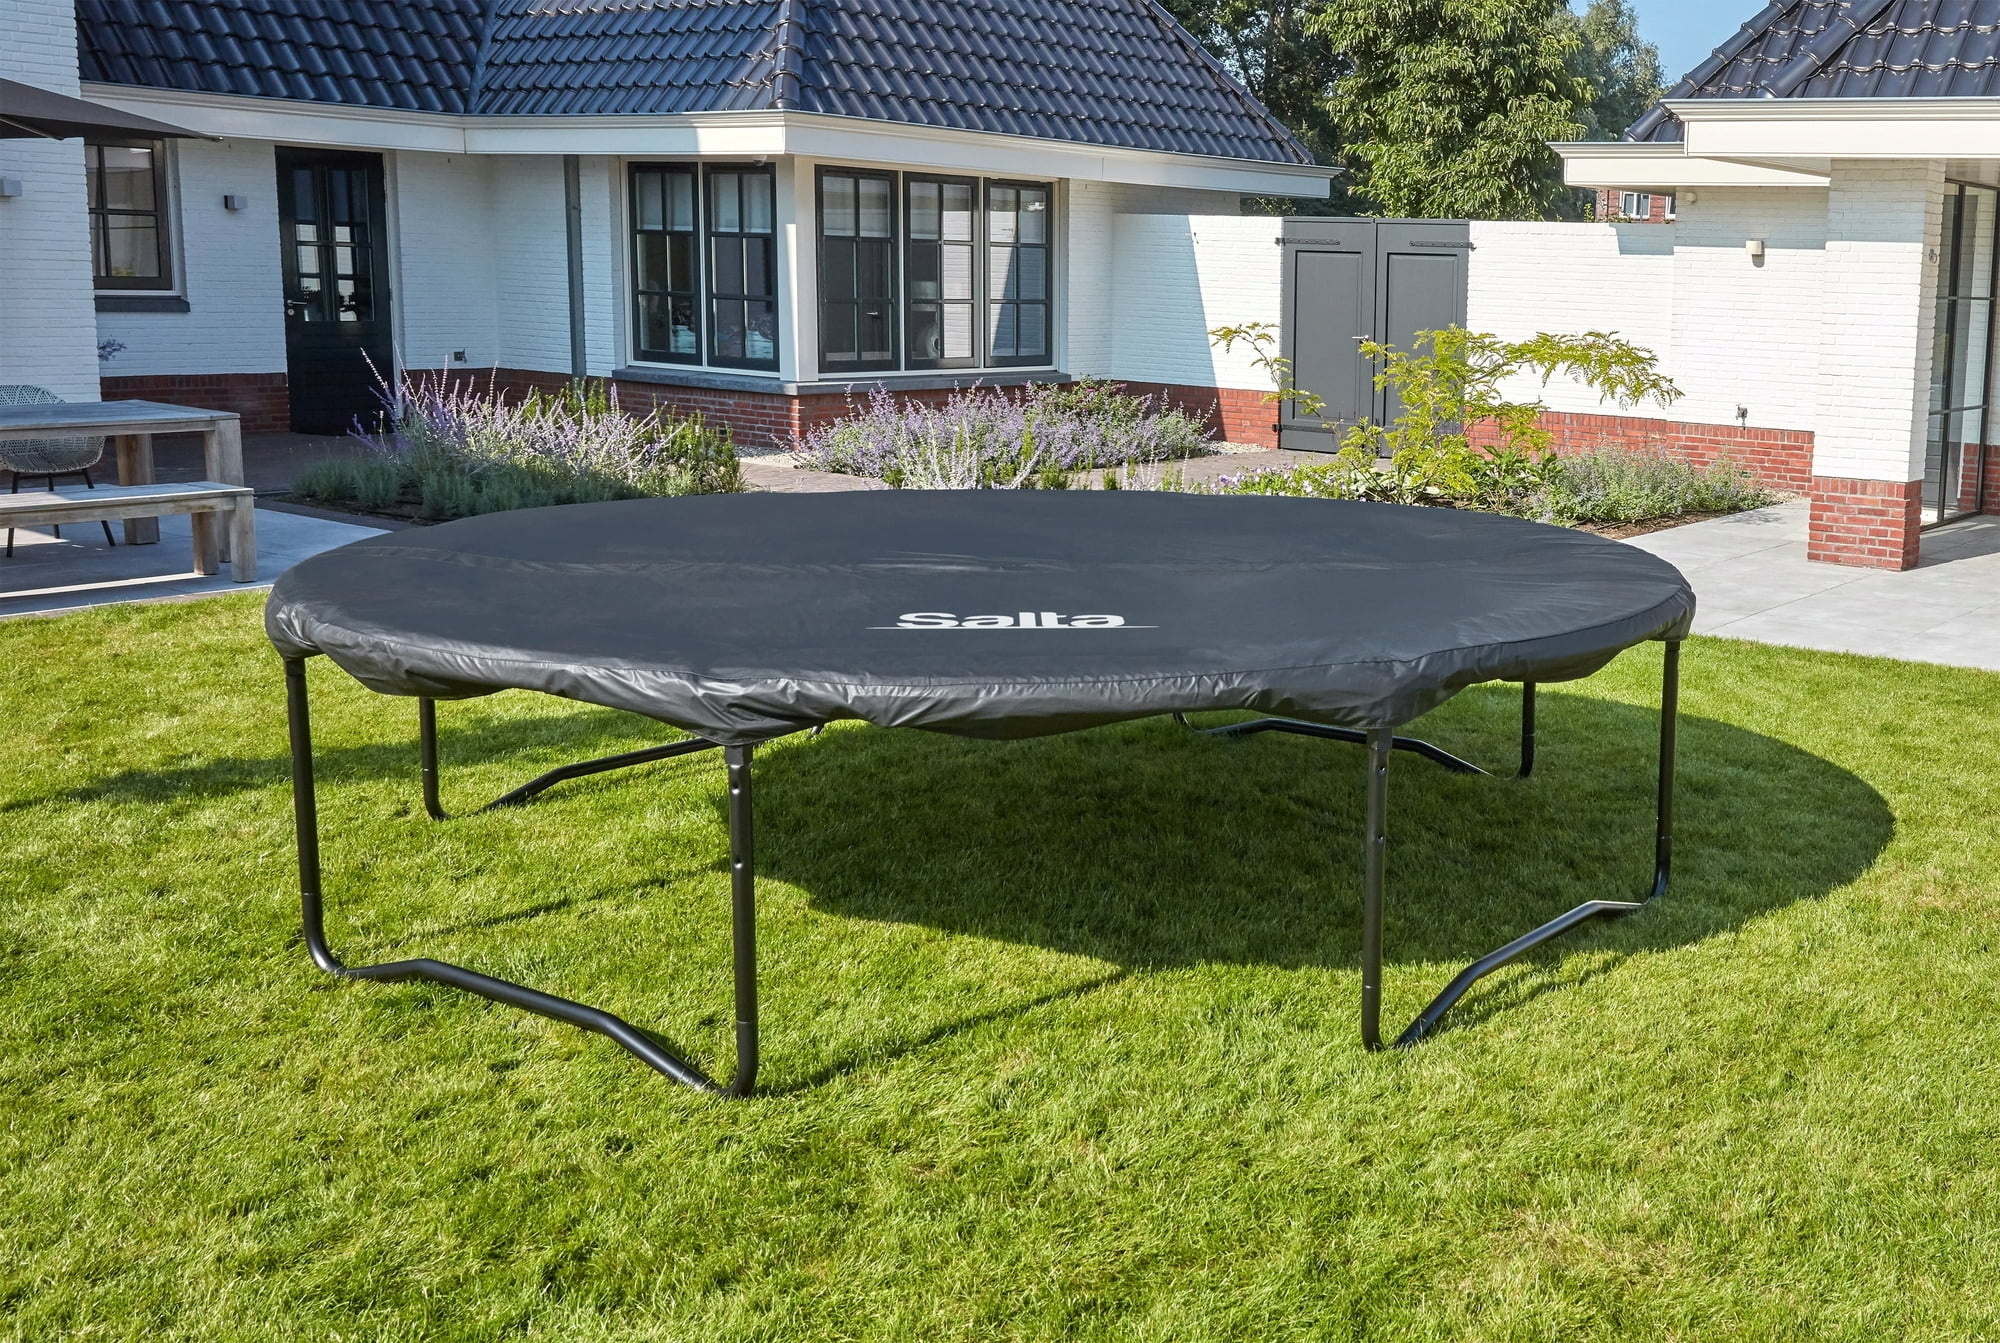 Trampolining: A backyard trampolined by Salta, A small but useful acrobatics apparatus for a recreational sport. 2000x1350 HD Background.